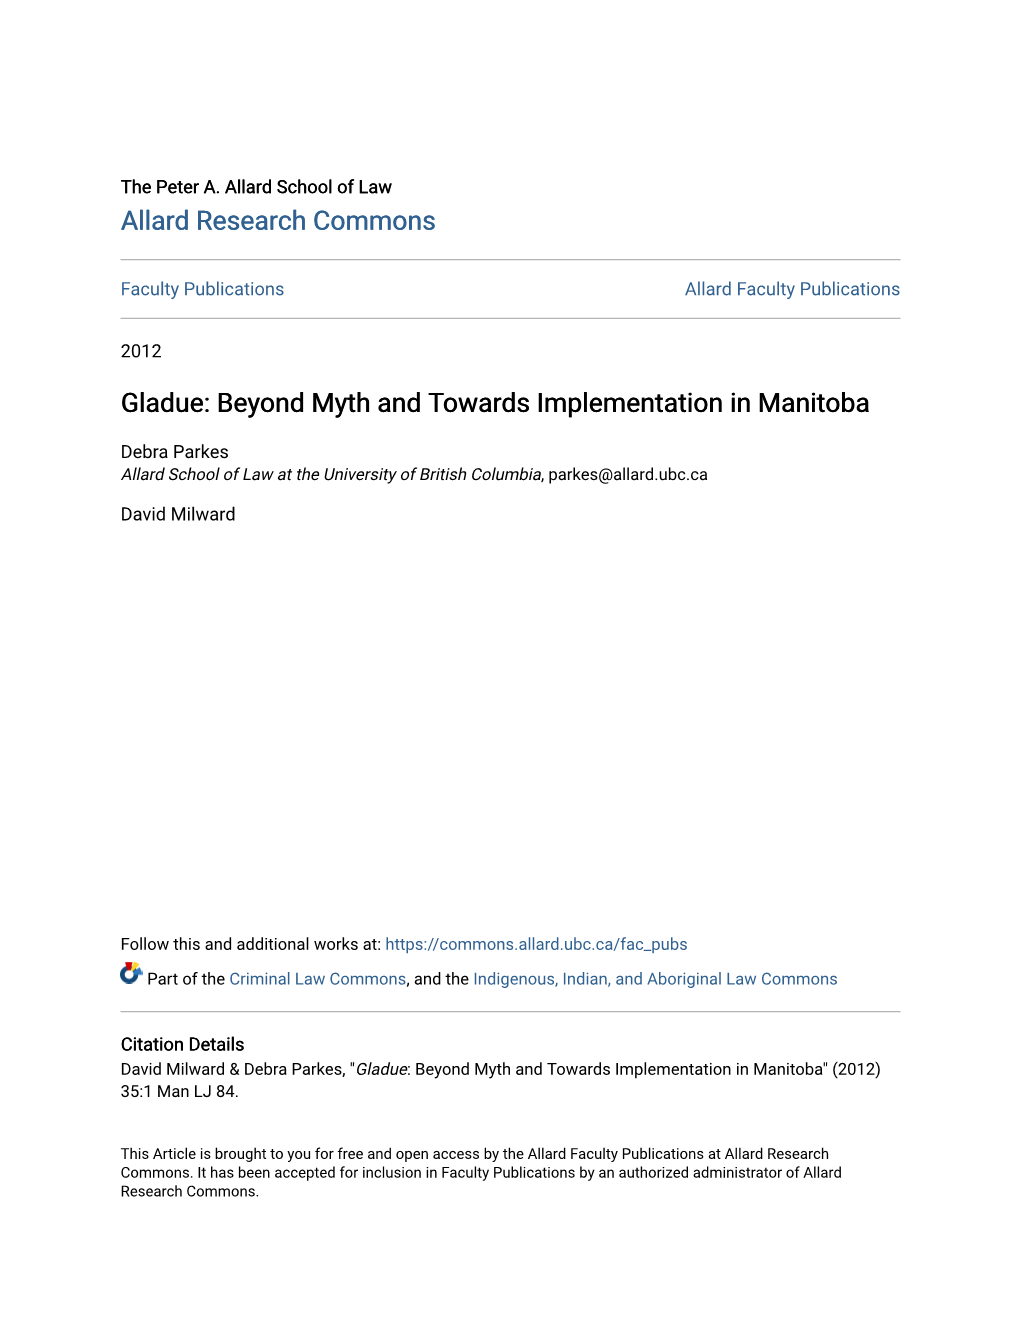 Gladue: Beyond Myth and Towards Implementation in Manitoba